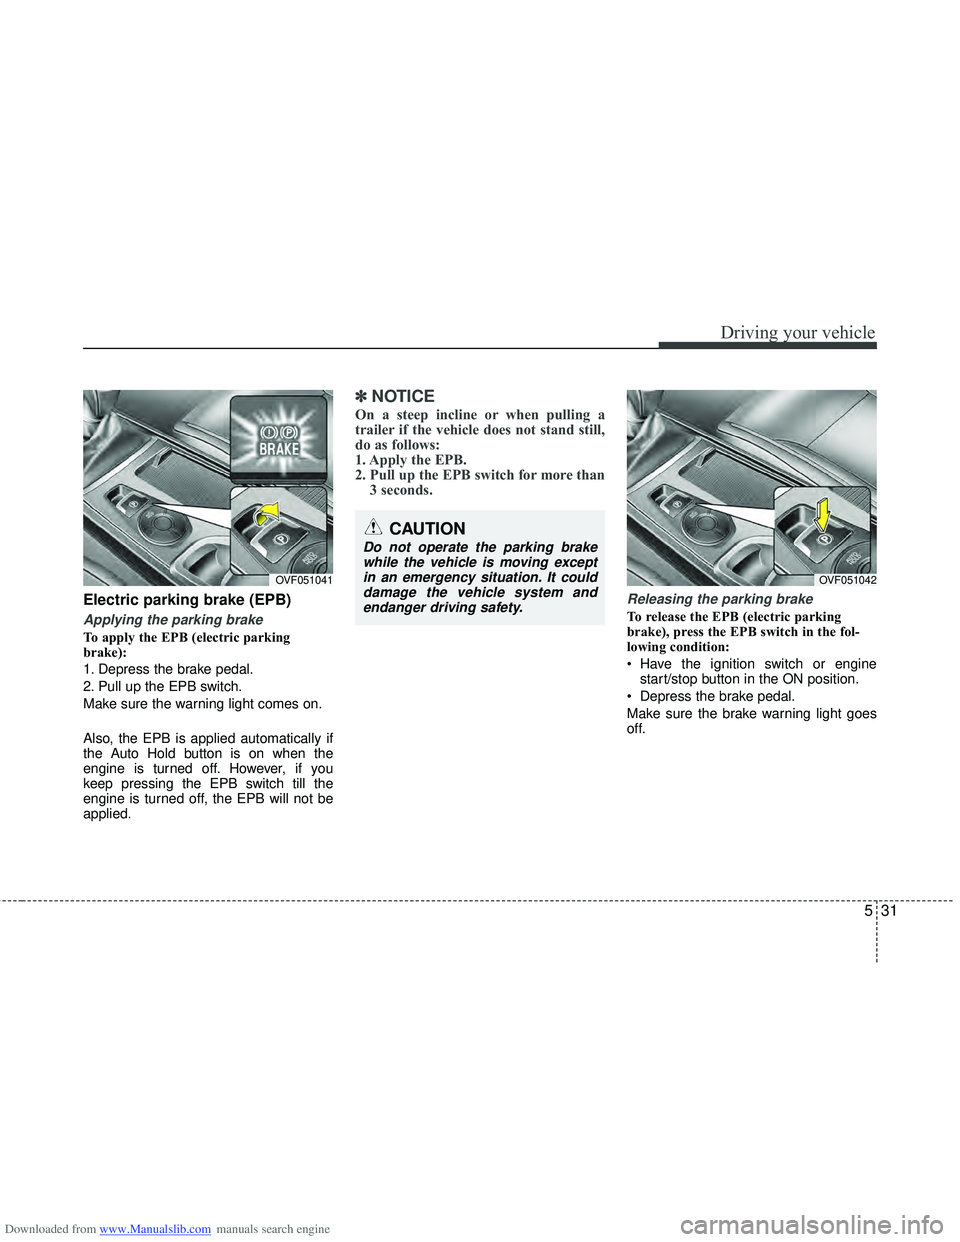 HYUNDAI I40 2017  Owners Manual Downloaded from www.Manualslib.com manuals search engine 531
Driving your vehicle
Electric parking brake (EPB)
Applying the parking brake
To apply the EPB (electric parking
brake):
1. Depress the brak